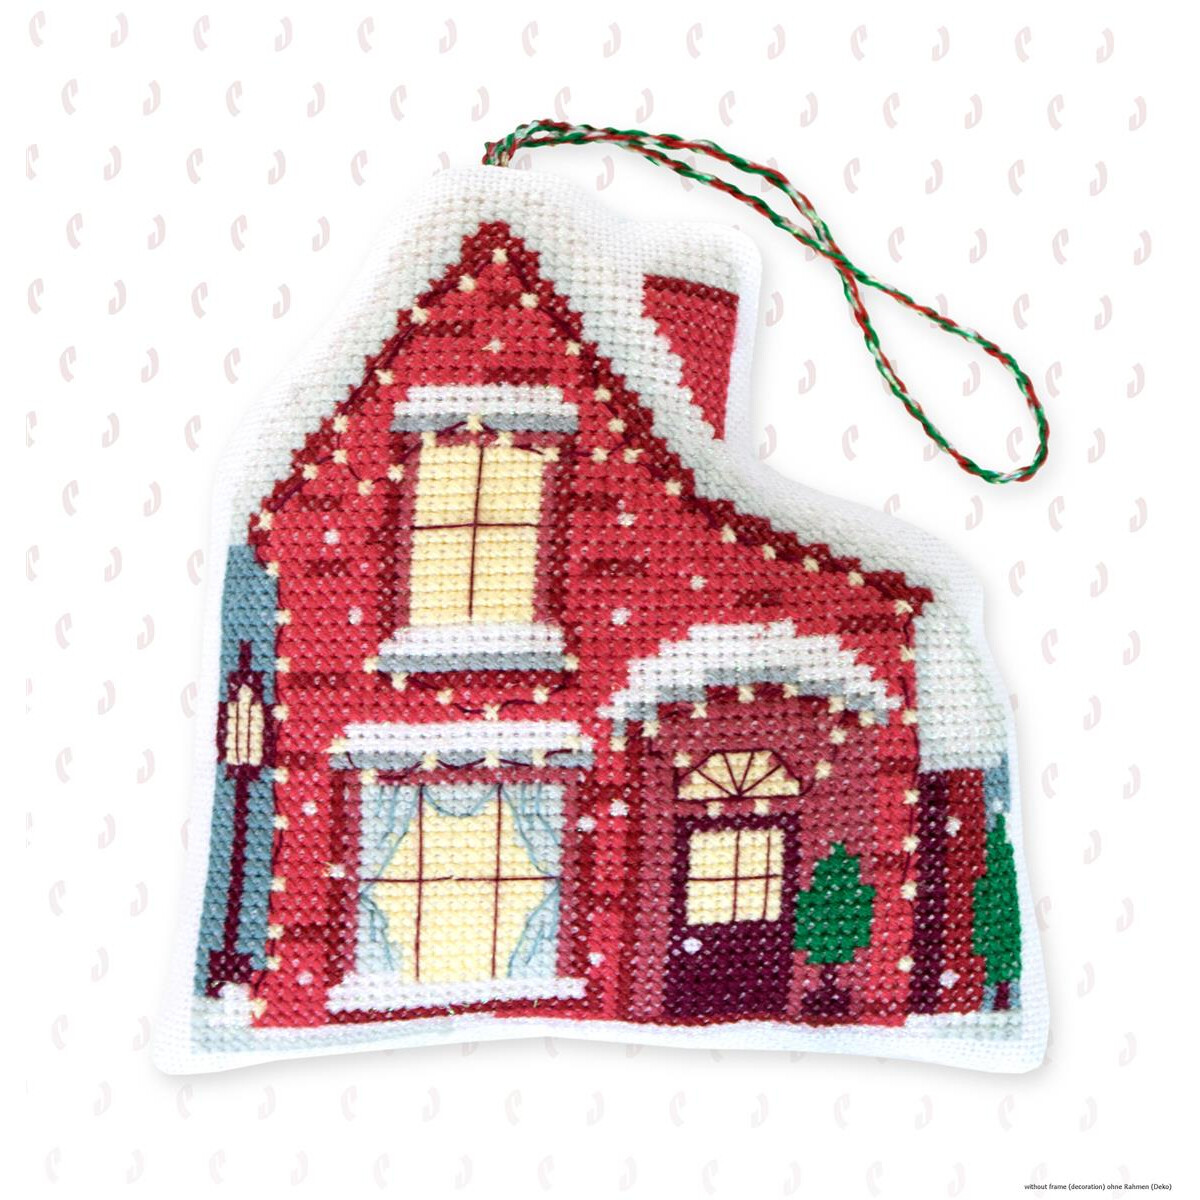 Luca-s counted cross stitch kit "House in...